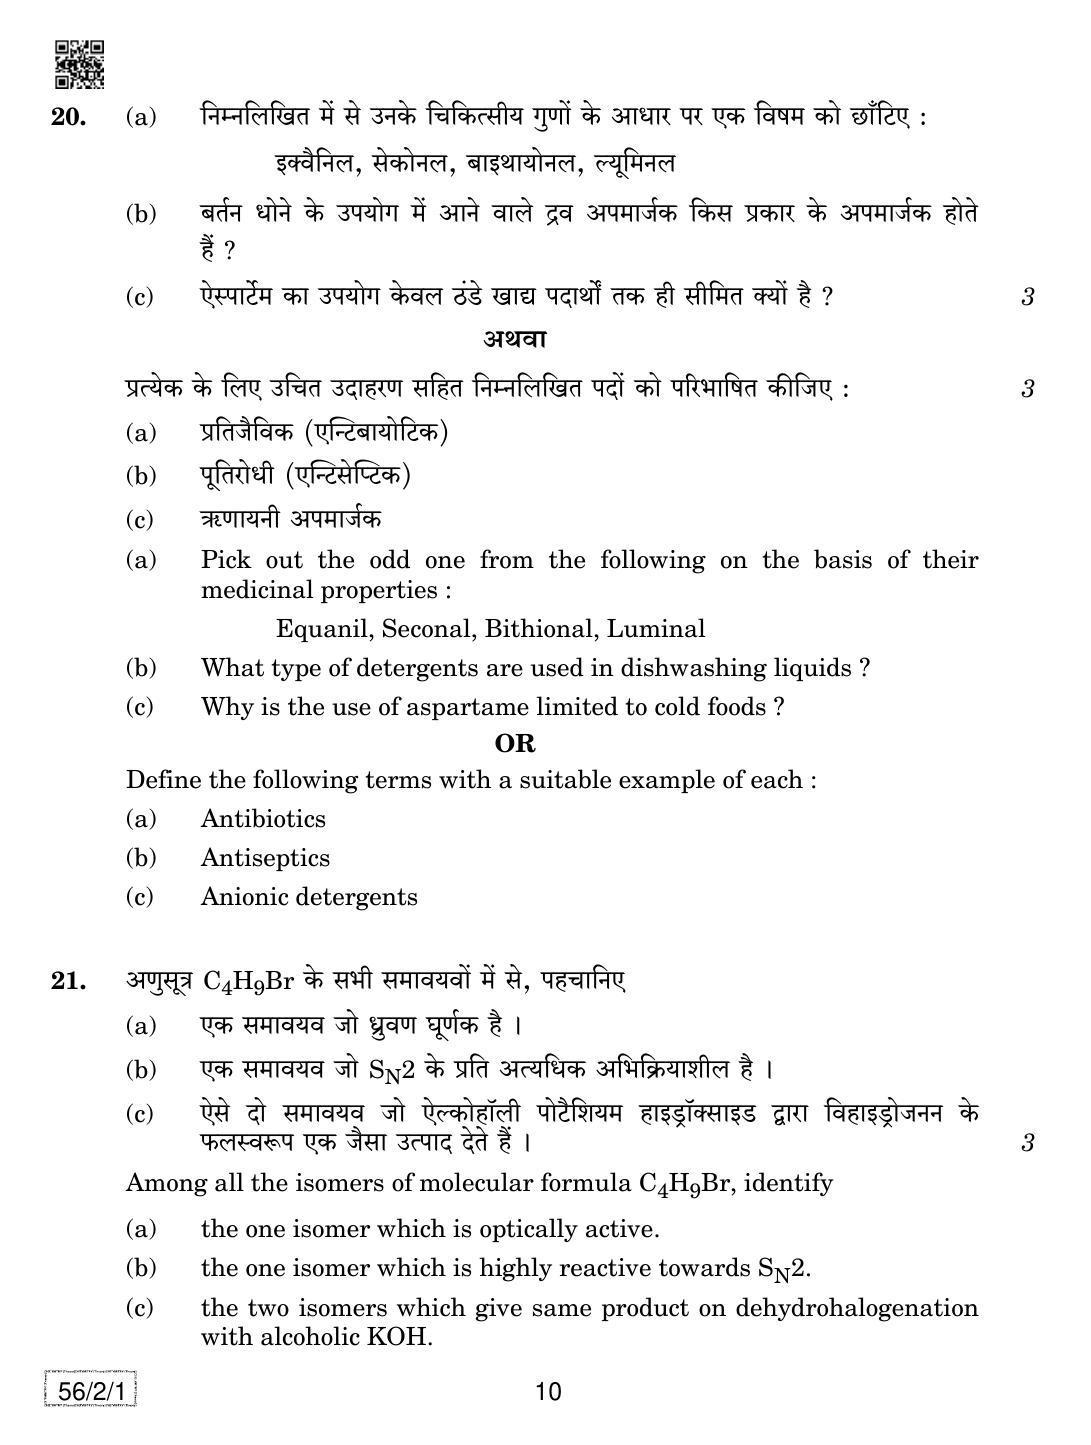 CBSE Class 12 56-2-1 Chemistry 2019 Question Paper - Page 10